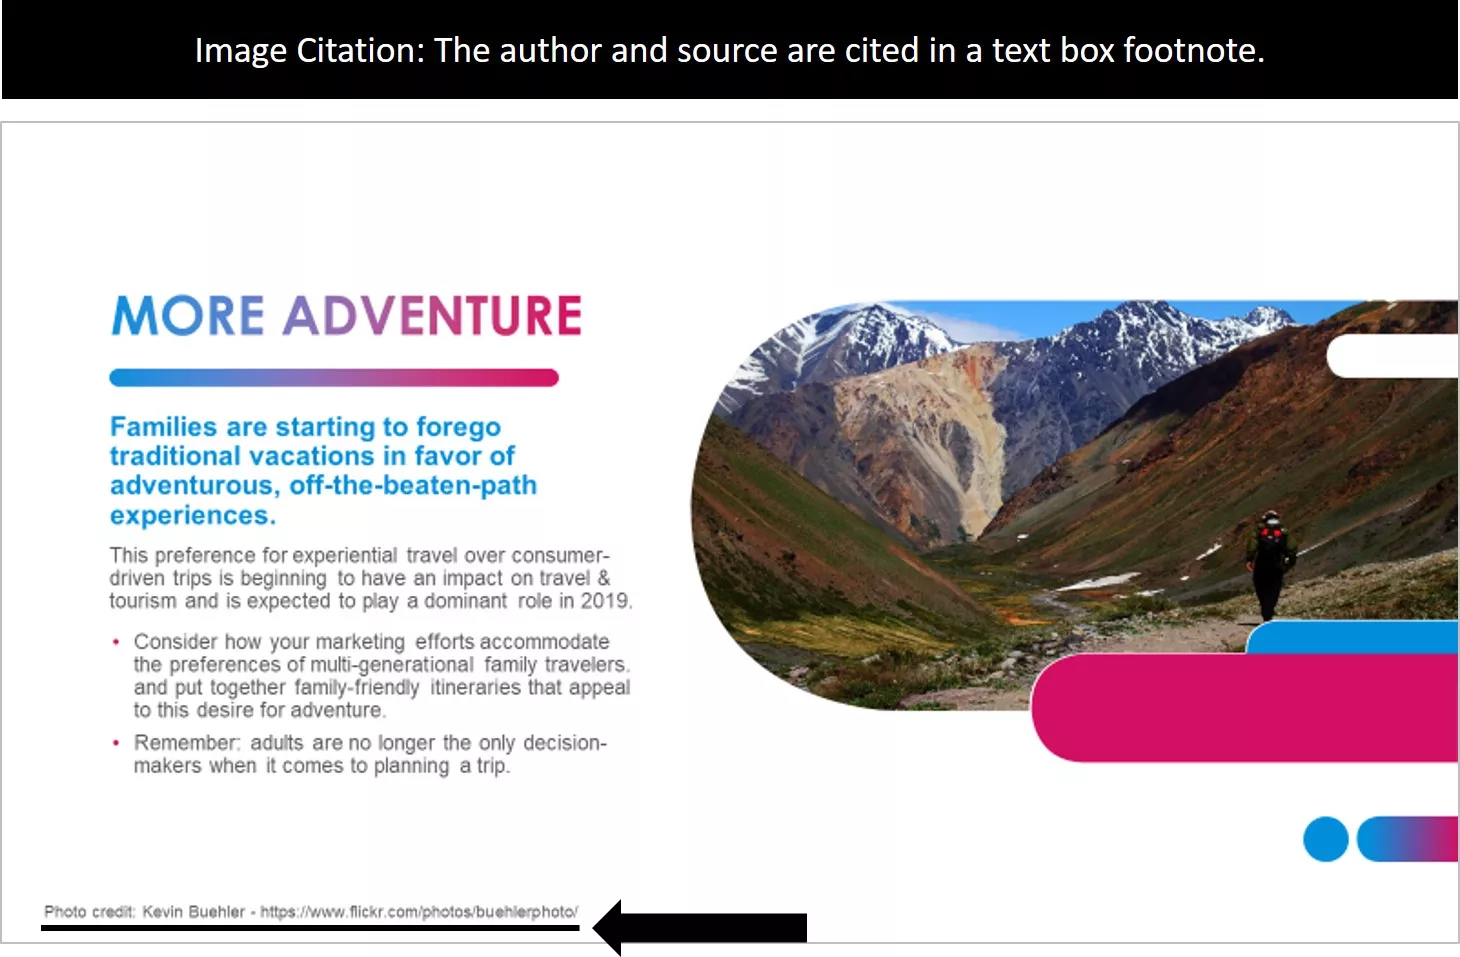 Example of a slide citing a picture in the footer